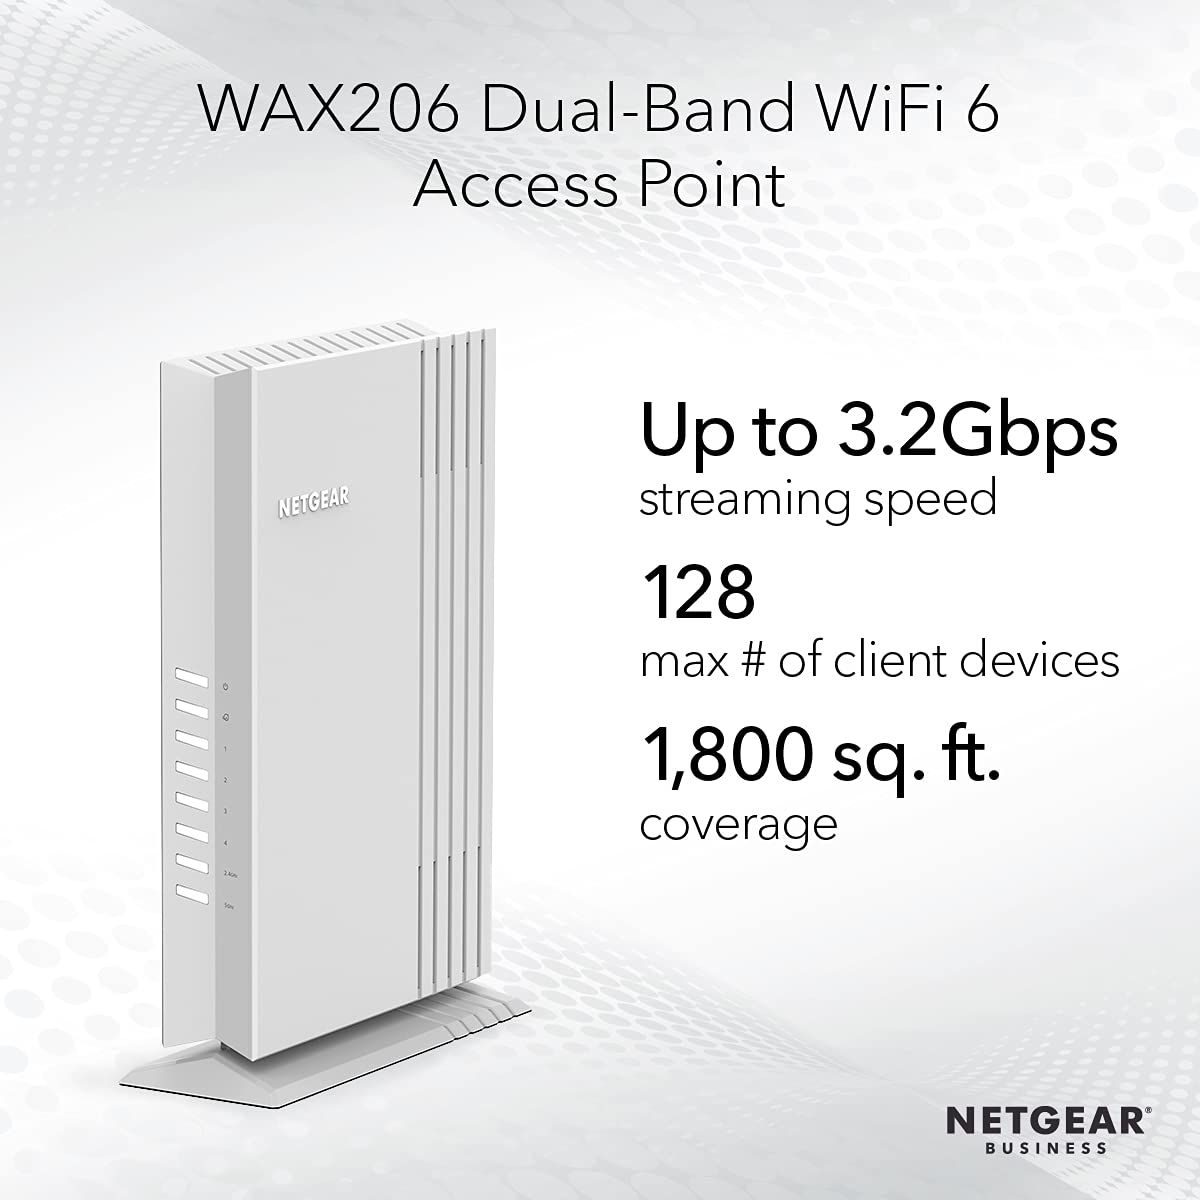 NETGEAR Wireless Desktop Access Point (WAX206)- WiFi 6 Dual-Band AX3200 Speed, 4x1G Ethernet Ports, 1x2.5G WAN, Up to 128 Devices, WPA3 Security, Up to 3 Separate WiFi Networks, MU-MIMO, 802.11ax